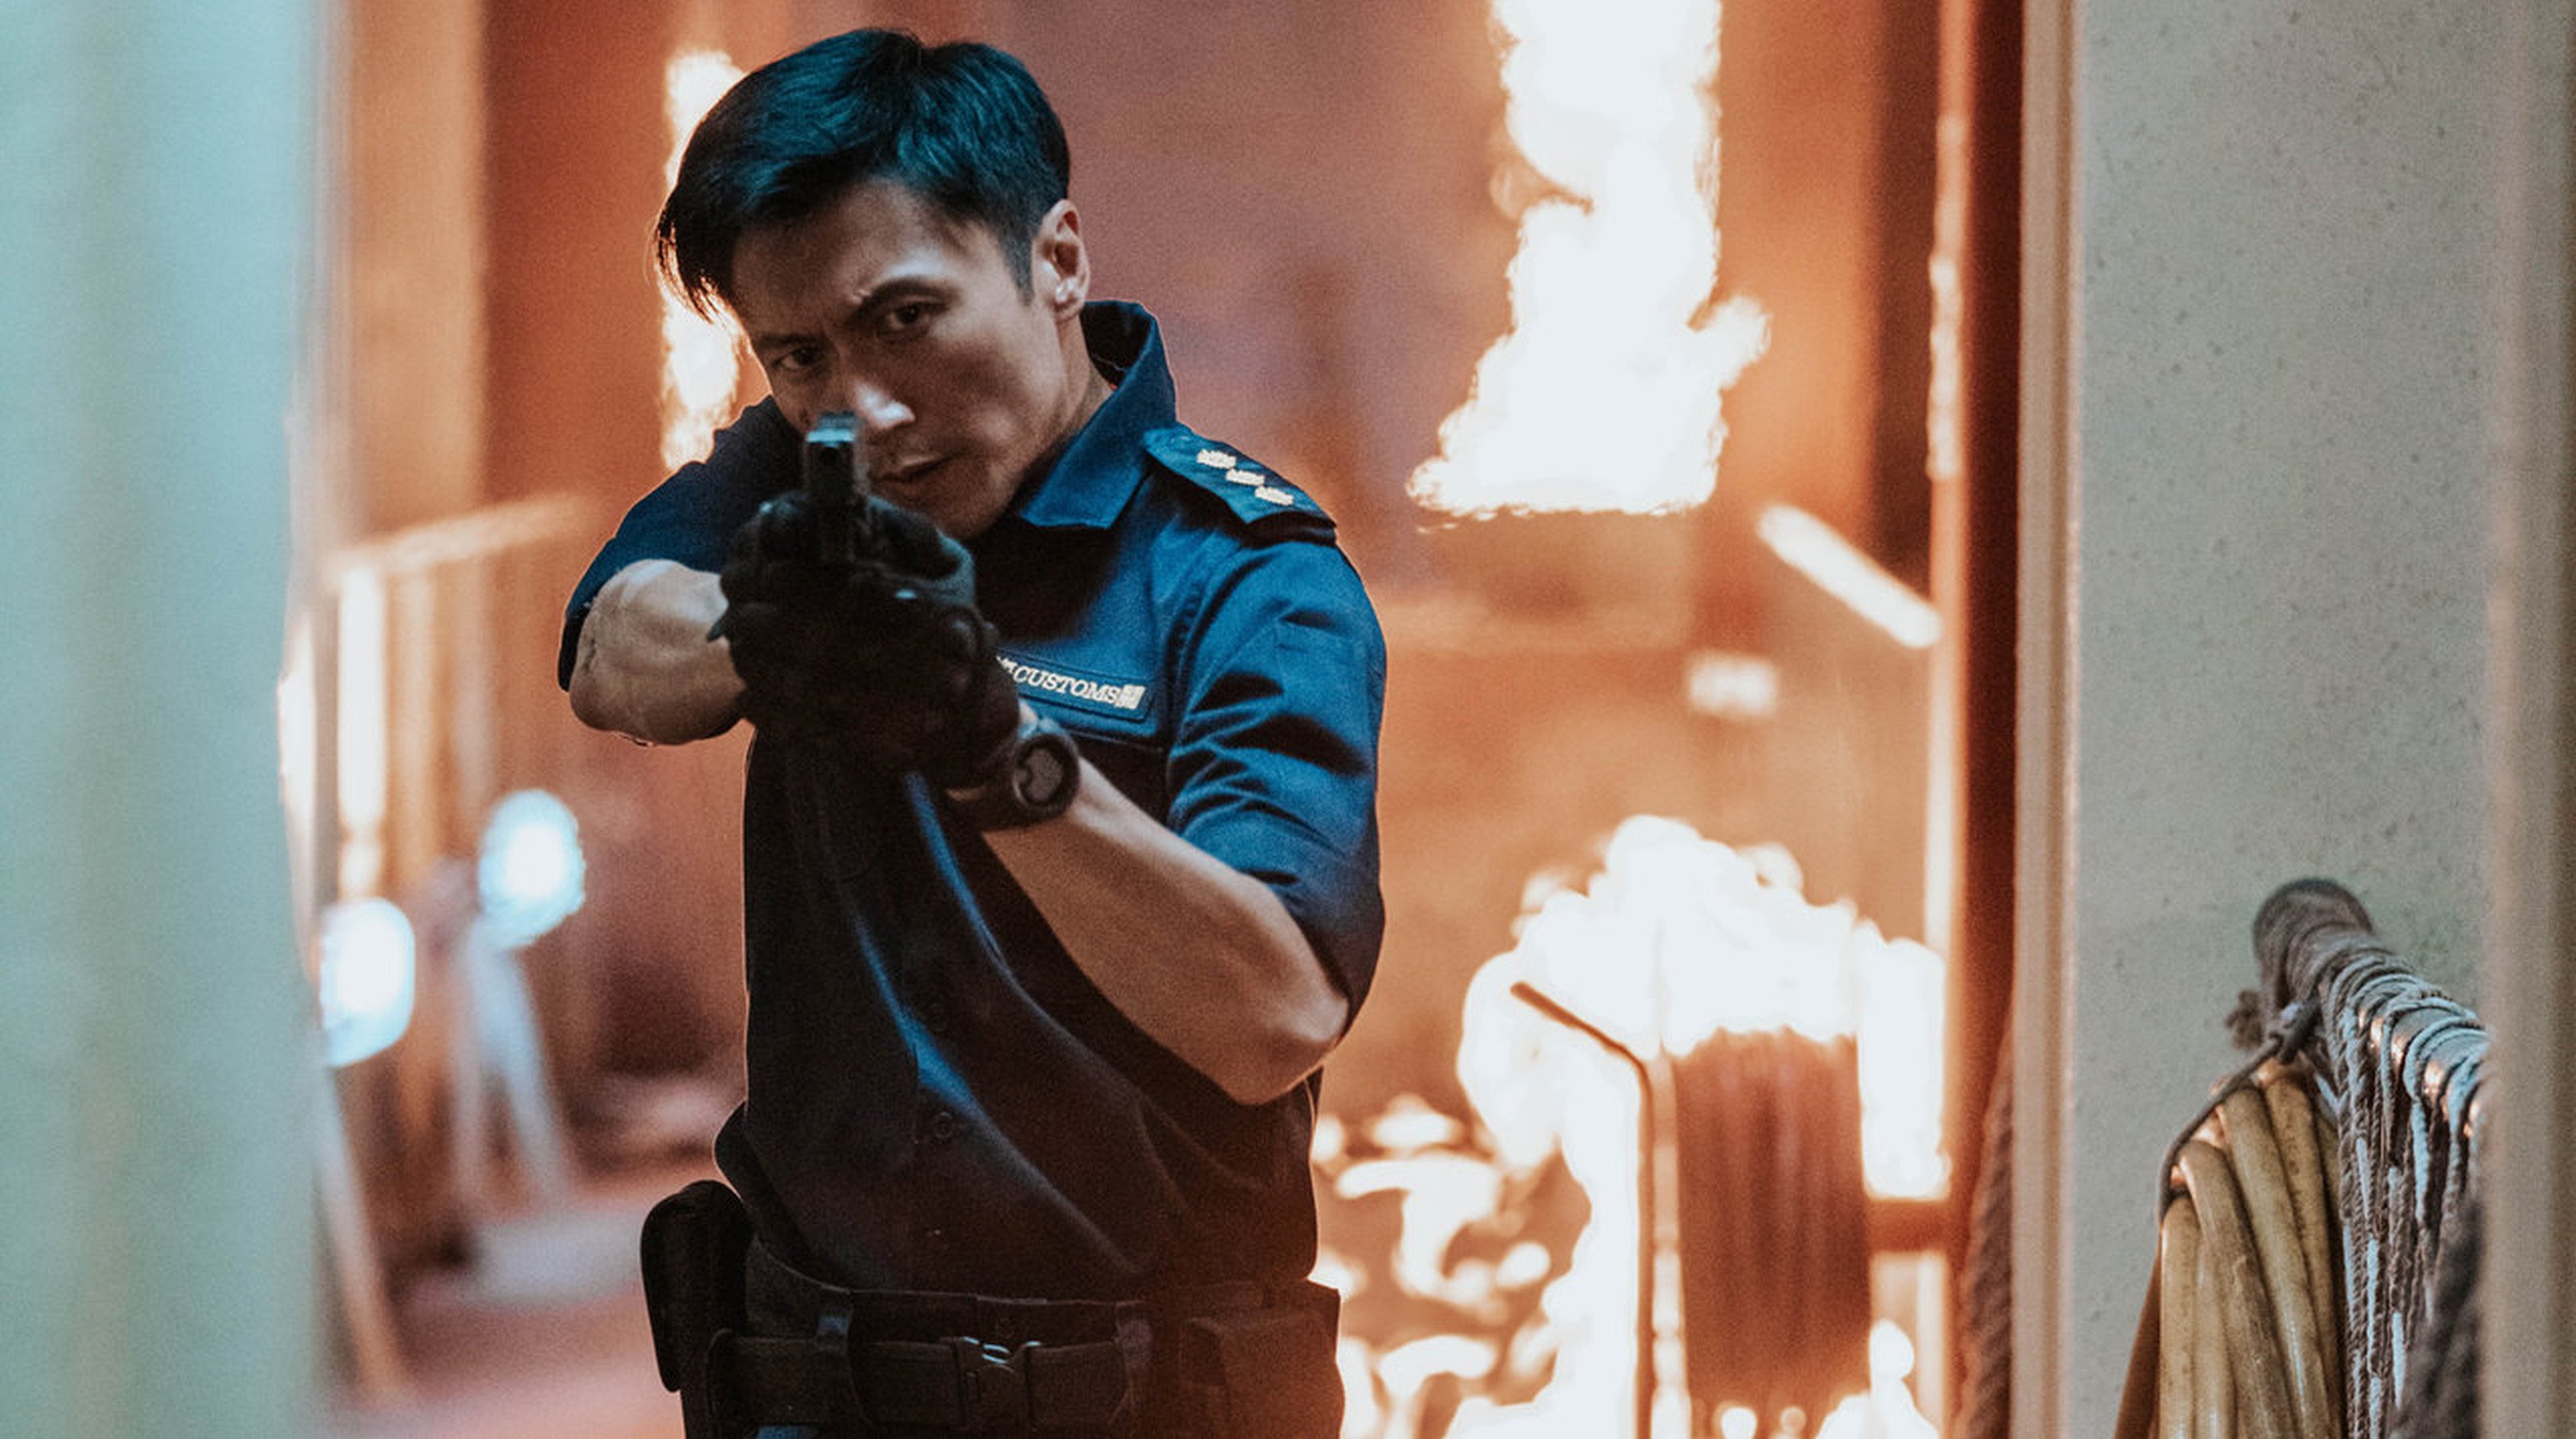 Nicholas Tse as a Hong Kong customs officer in a still from Customs Frontline (category IIB; Cantonese), directed by Herman Yau. Jacky Cheung and Karena Lam co-star.